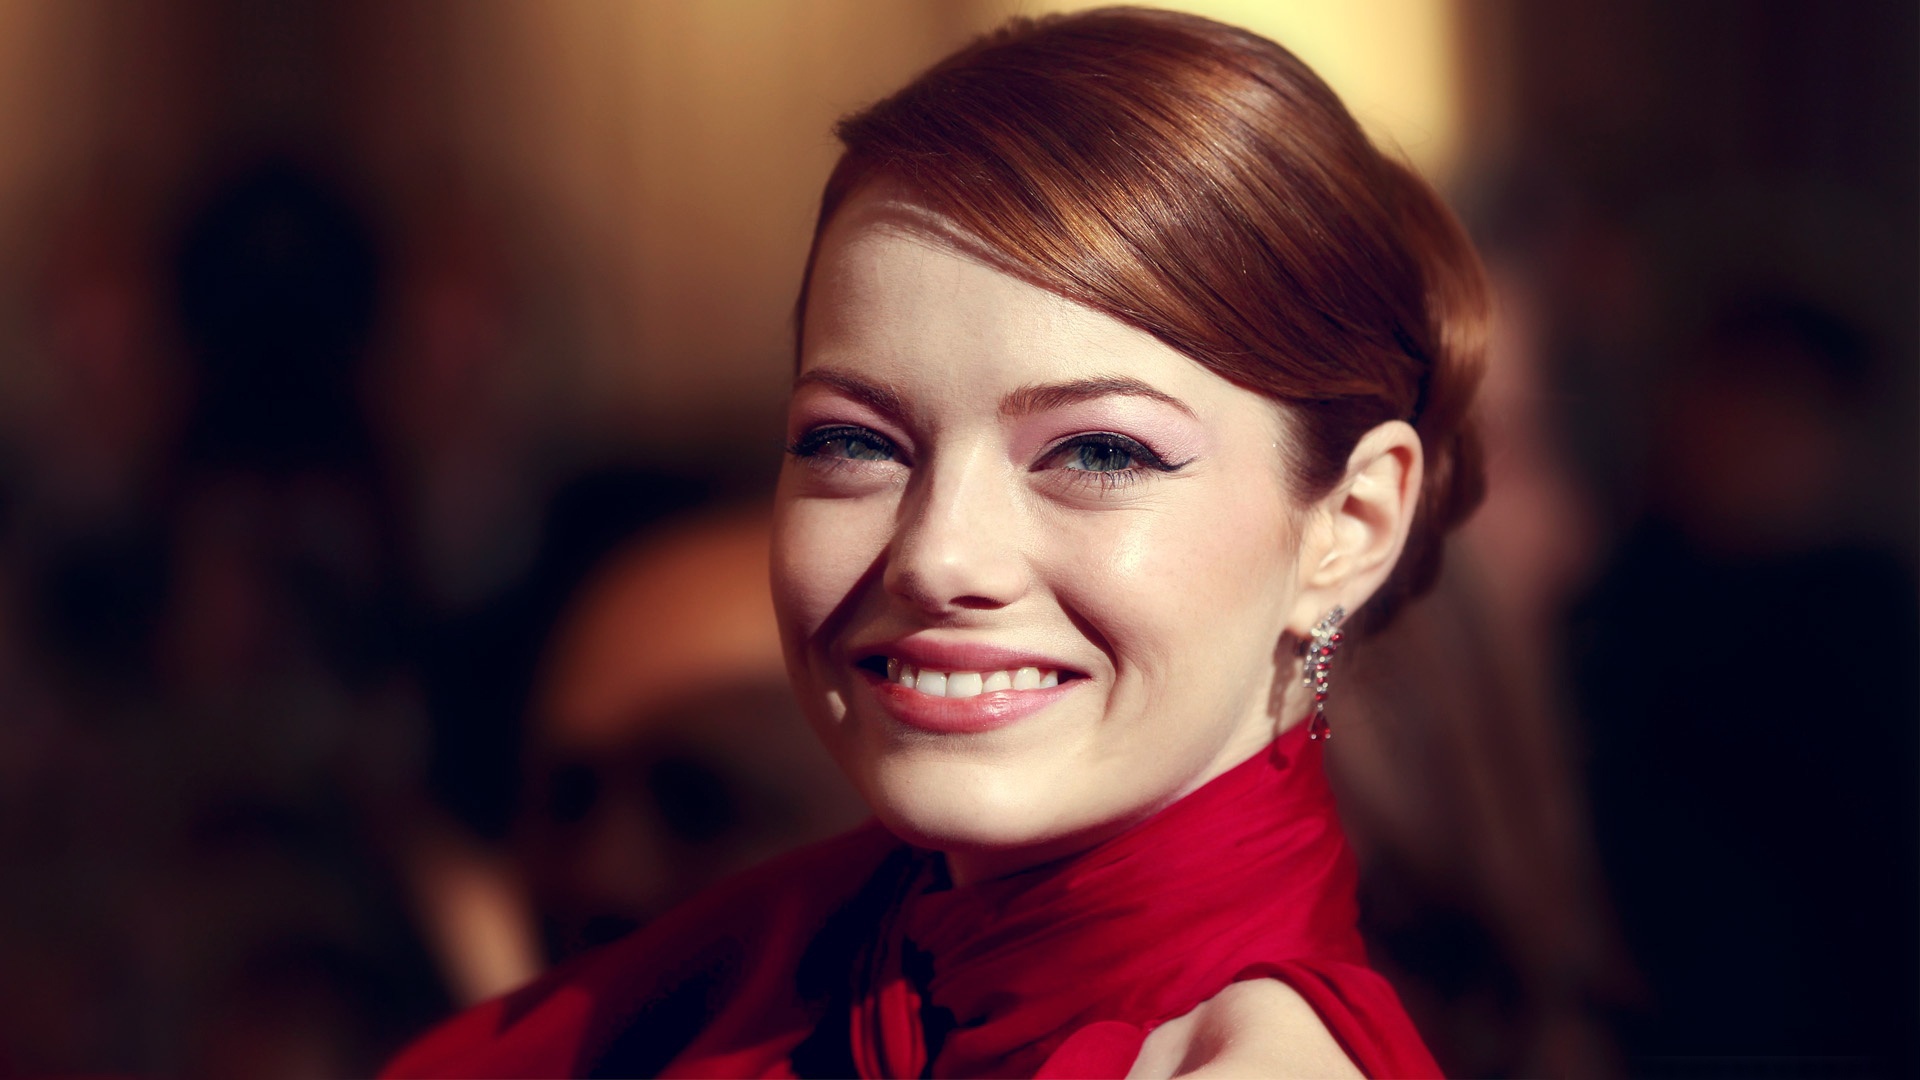 emma stone pictures hd a13